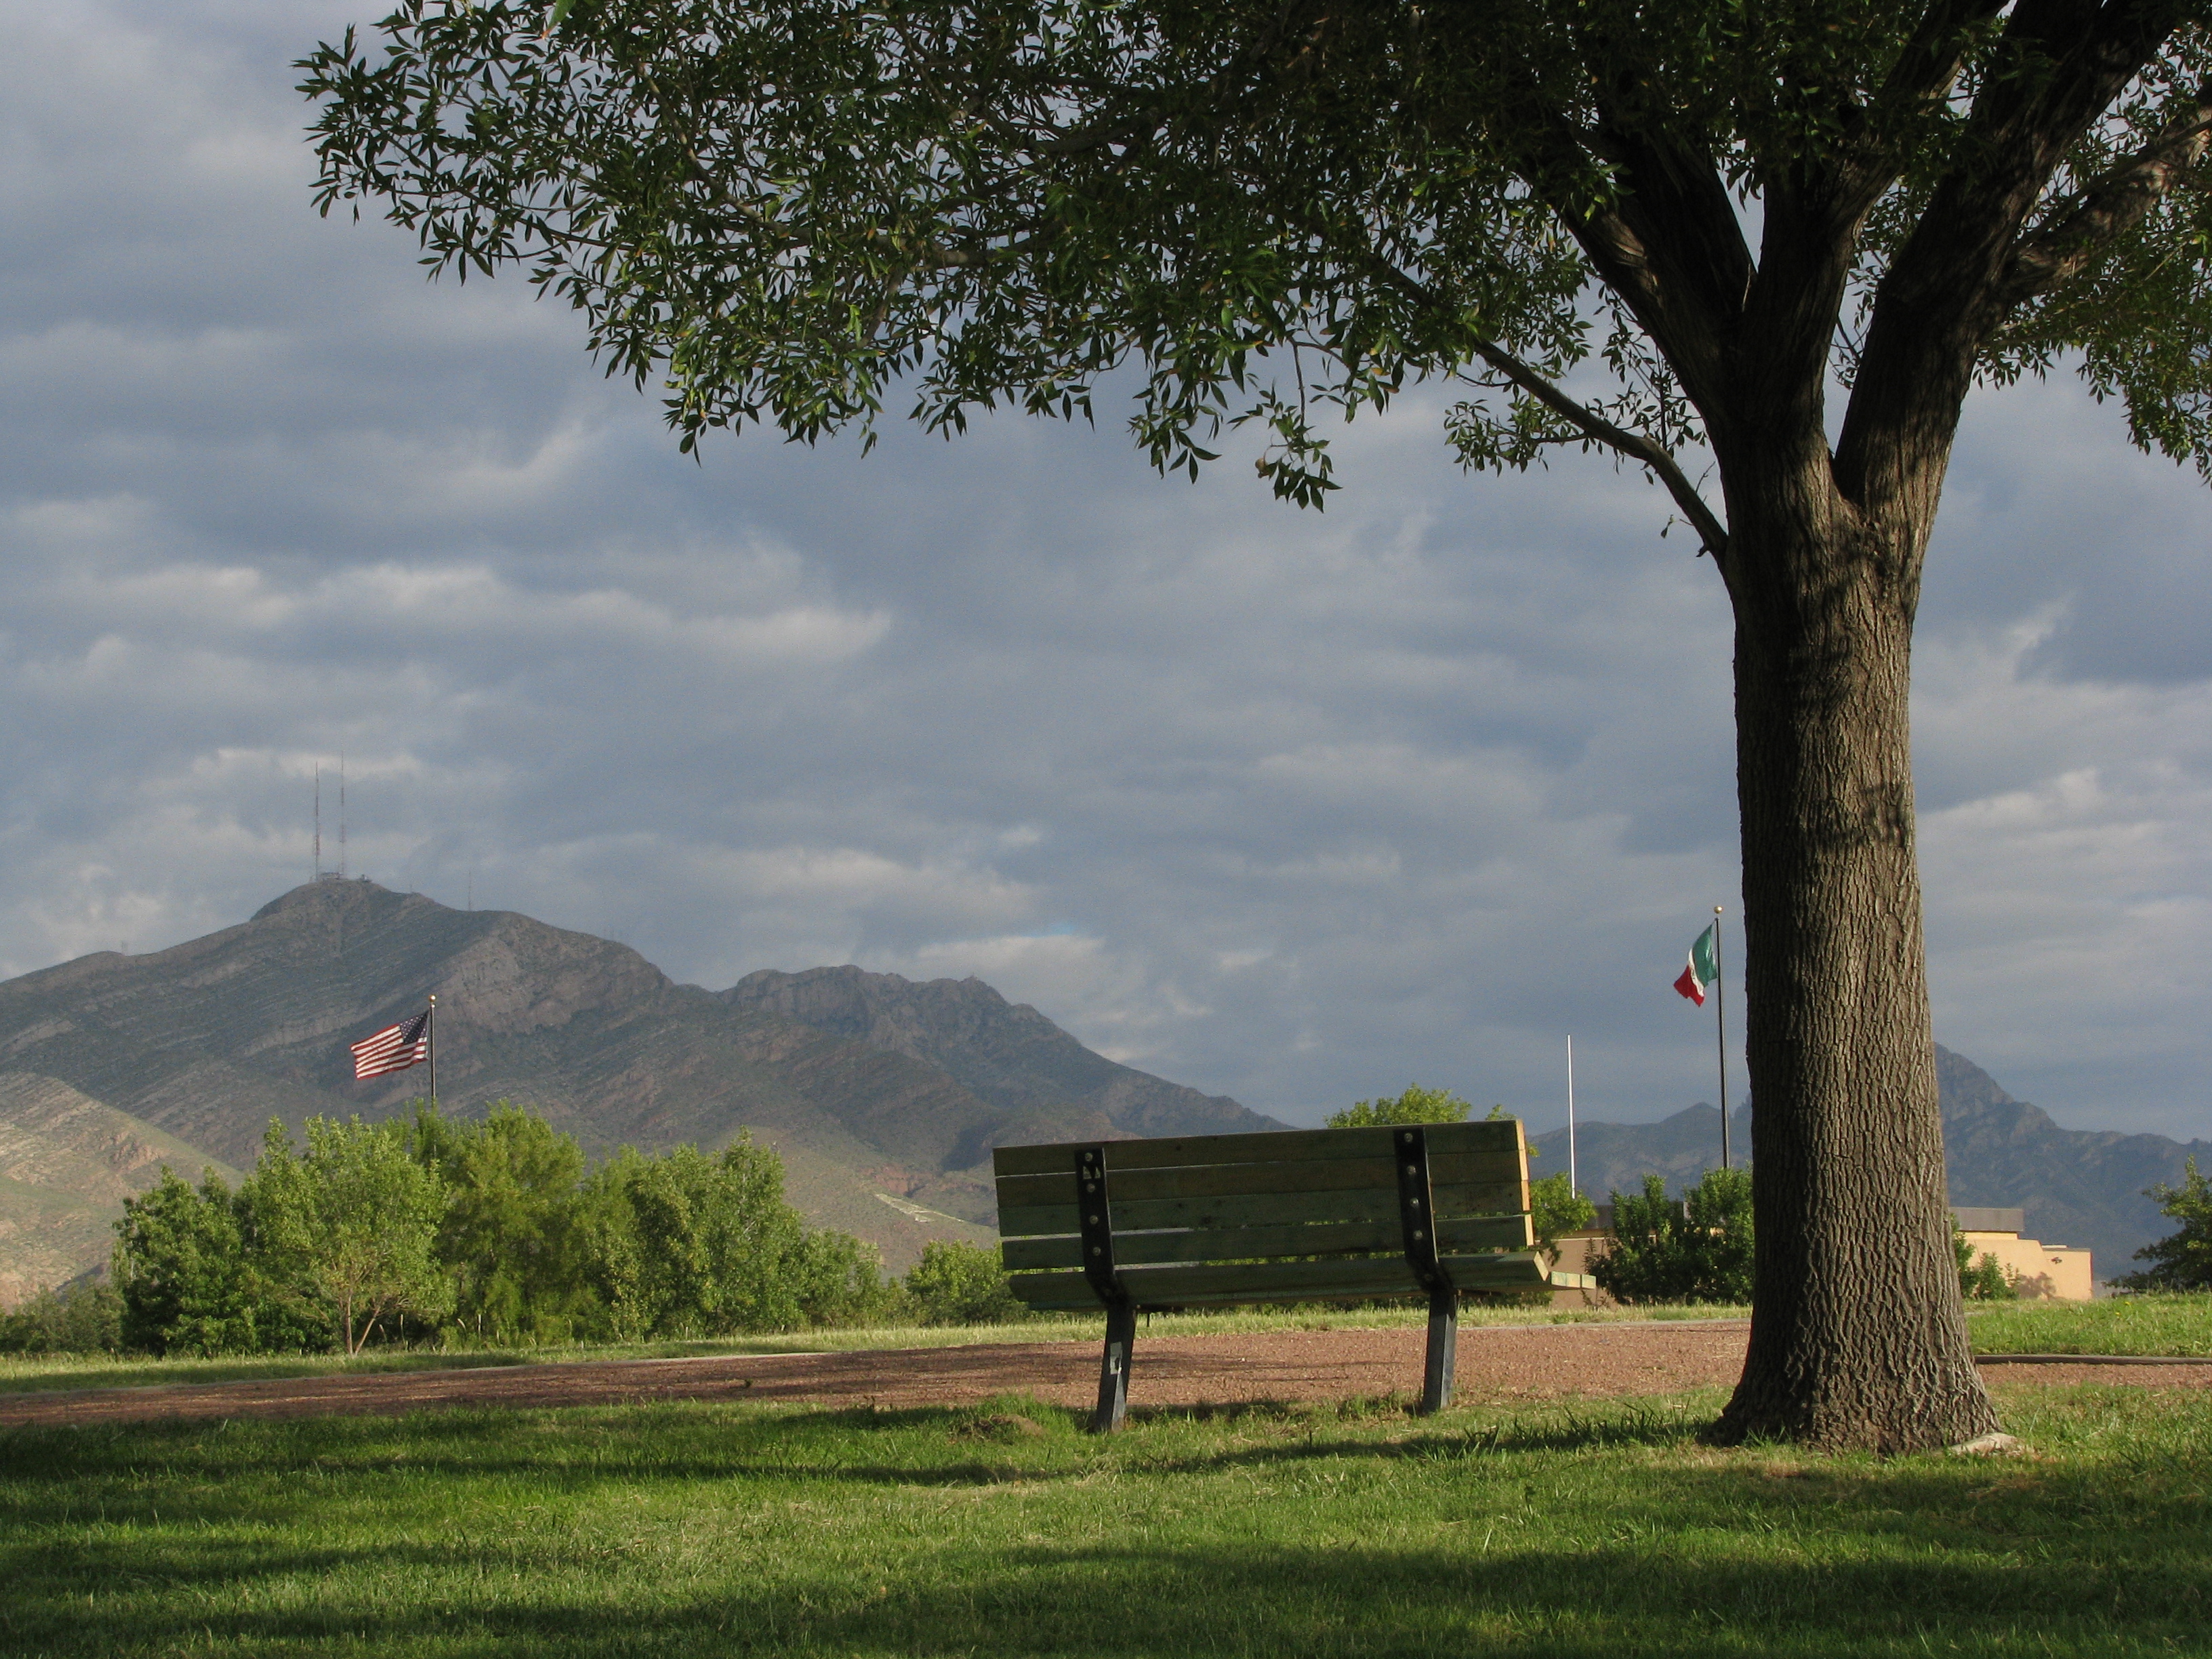 a bench next to a tree with U.S. and Mexican flags flying against a mountain background